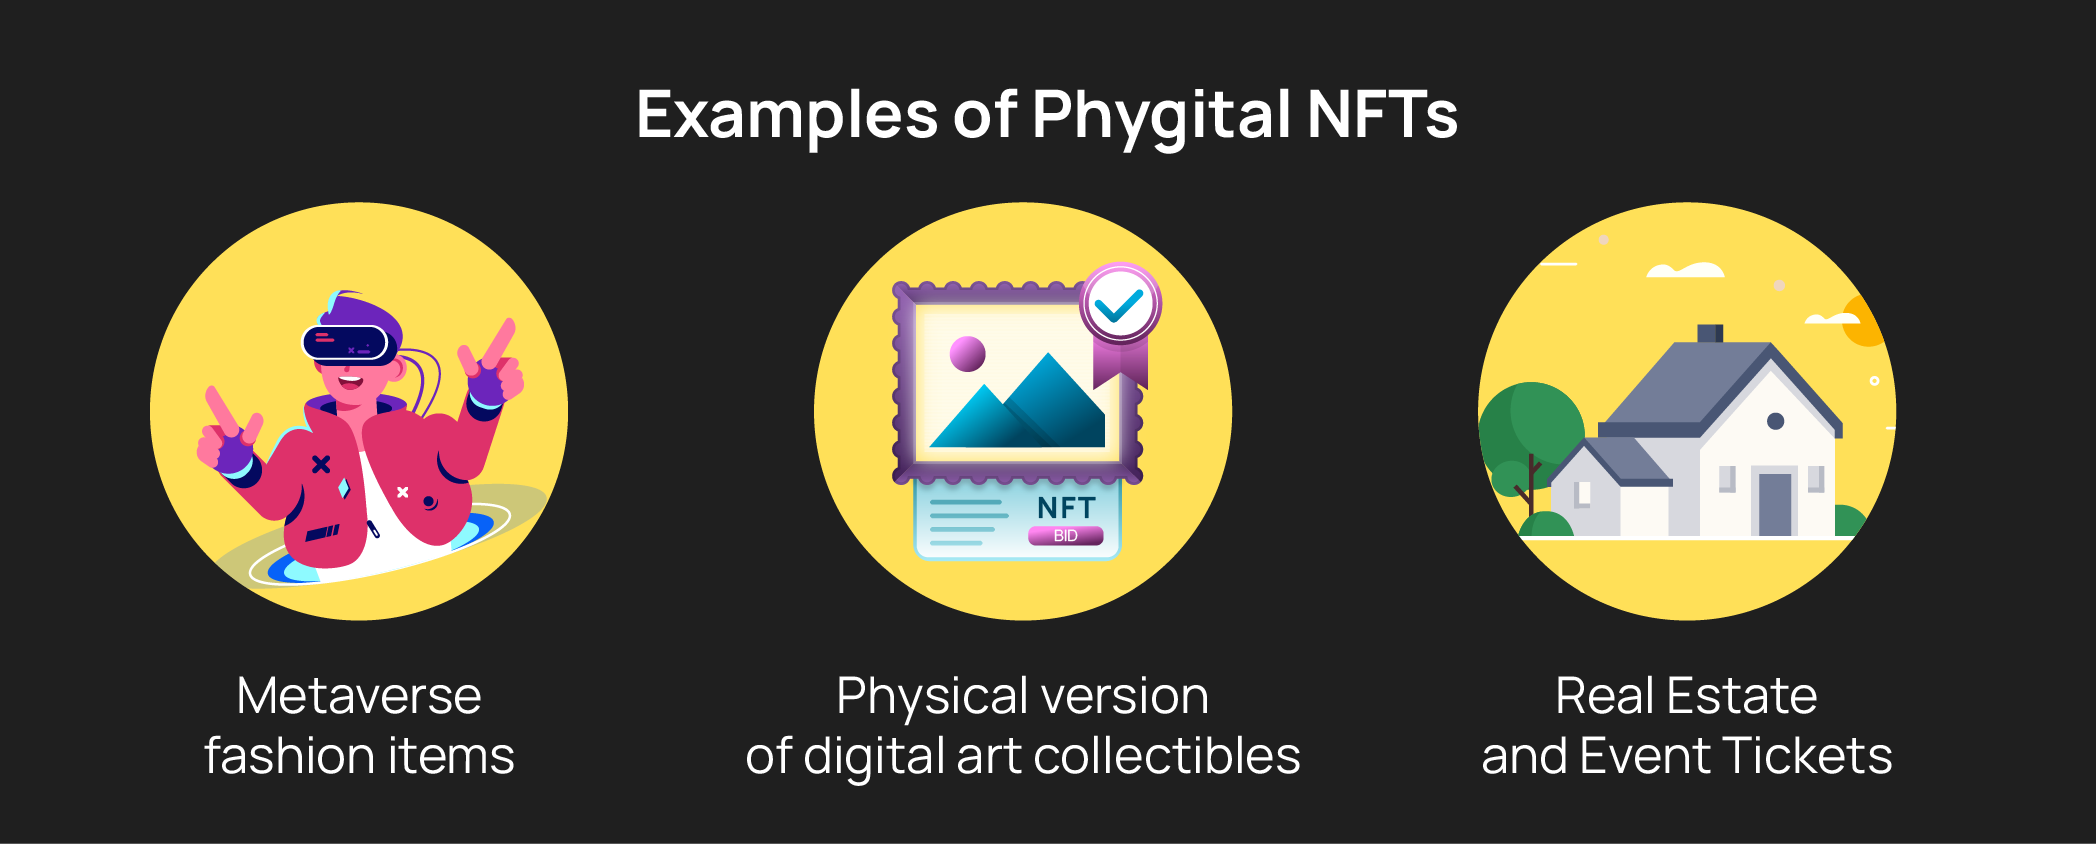 Examples of Phygital NFTs